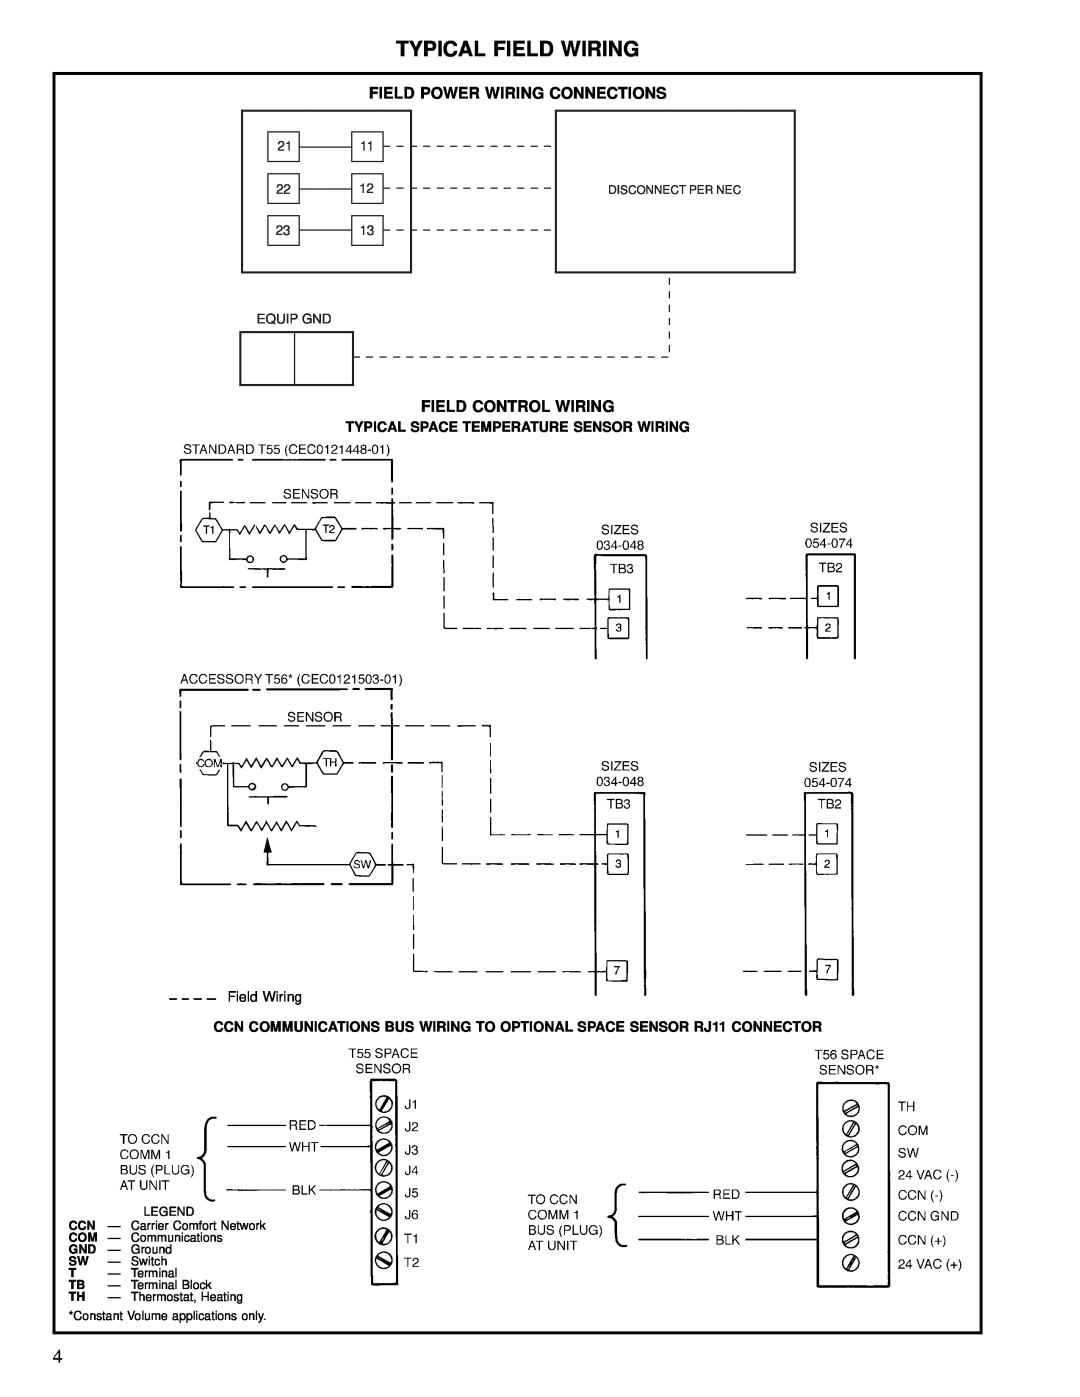 Carrier 50JB038 Typical Field Wiring, Field Power Wiring Connections, Field Control Wiring, Equip Gnd, Disconnect Per Nec 